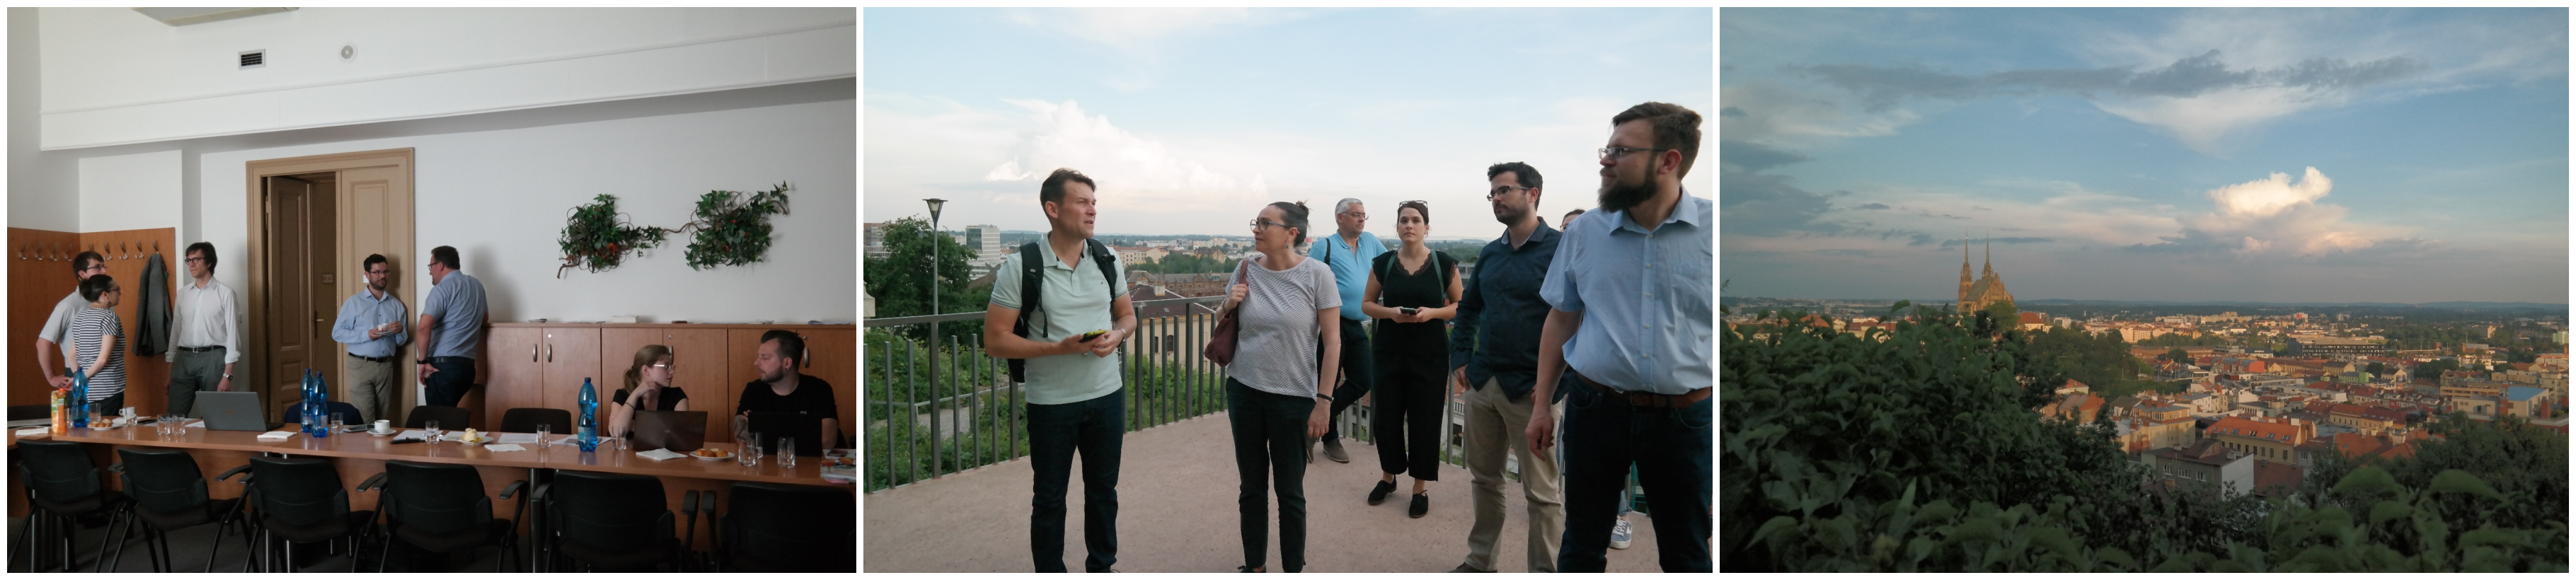 4th partner meeting and guided tour through Brno 